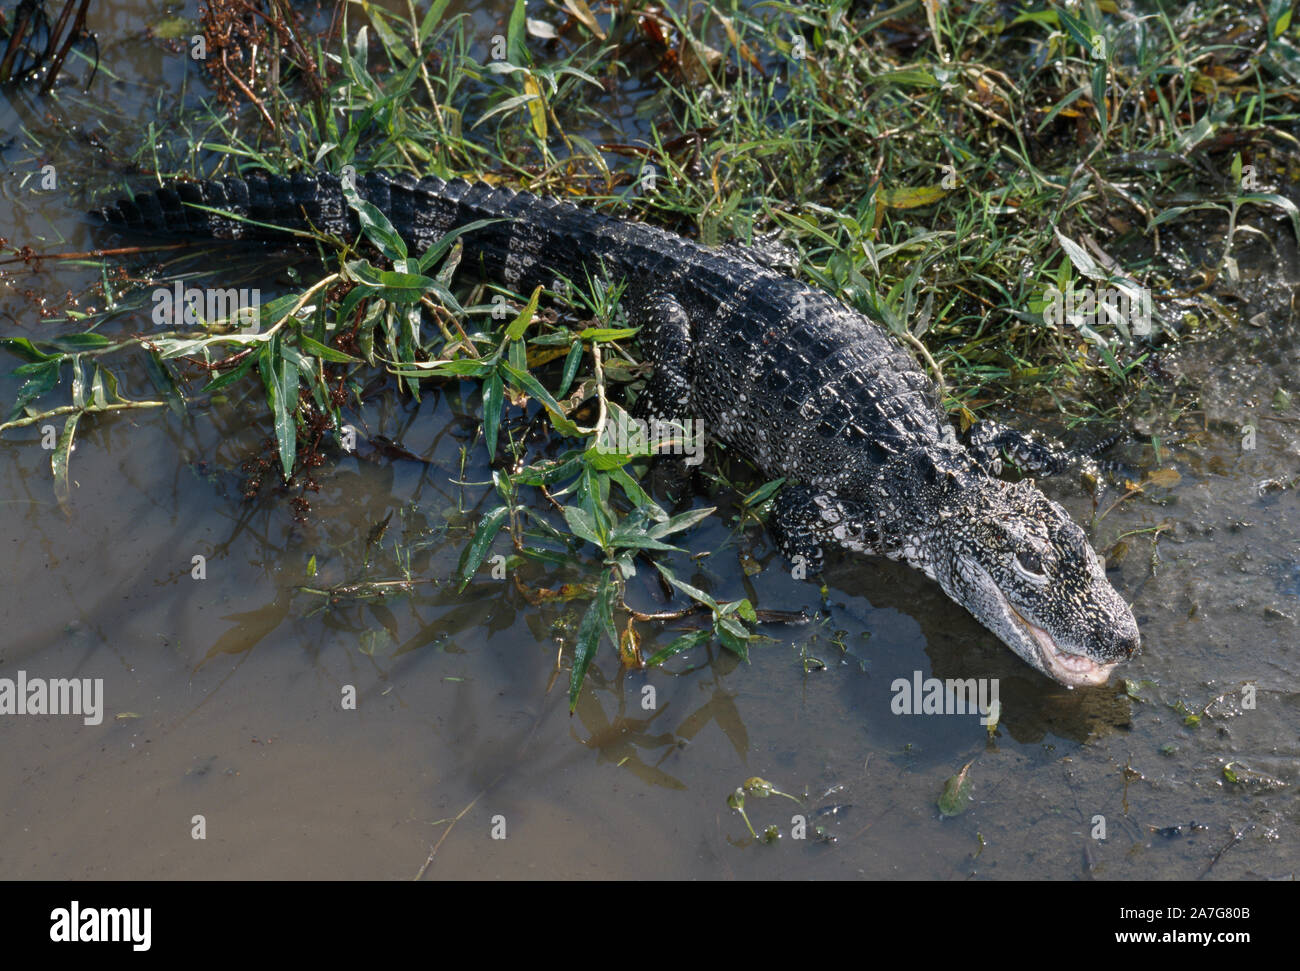 CHINESE ALLIGATOR (Alligator sinensis). CRITICALLY ENDANGERED SPECIES. Dorsal view, full length. Scaled skin pattern. Waters edge. Wetlands. Endemic s Stock Photo